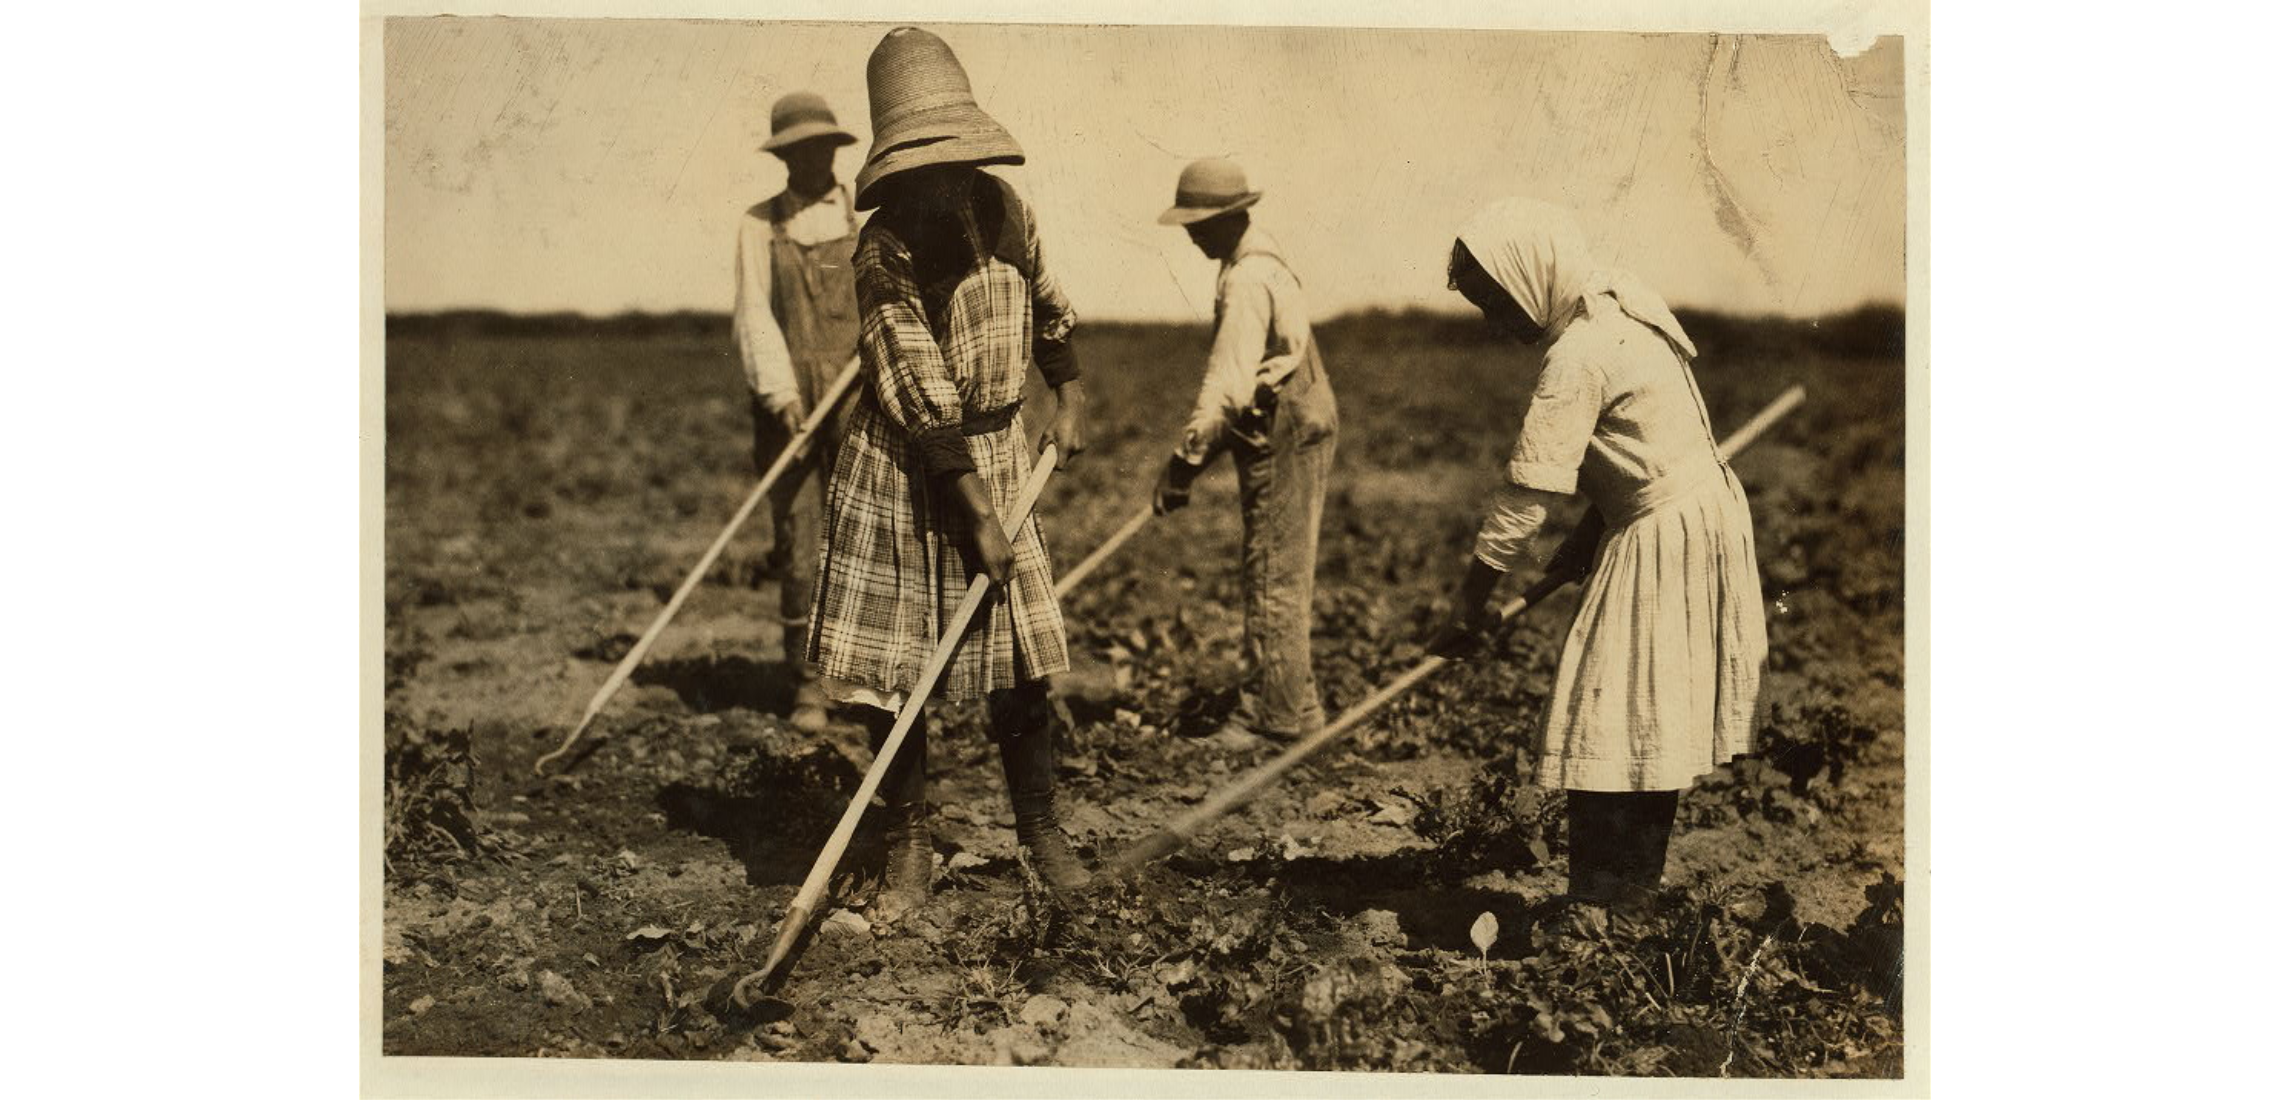 Photo of four children using hoes and working in a field to tend to the sugar beet crops. The taller girl in the foreground is wearing a plaid dress with dark boots and a long-brimmed hat. The other girl, working next to her, is wearing a white scarf on her head, and a white dress with dark boots. The two boys in the background are both wearing overalls and white shirts, with brimmed hats. All of the children are looking down at the ground and their faces can't be seen. The crops are not yet very tall. 